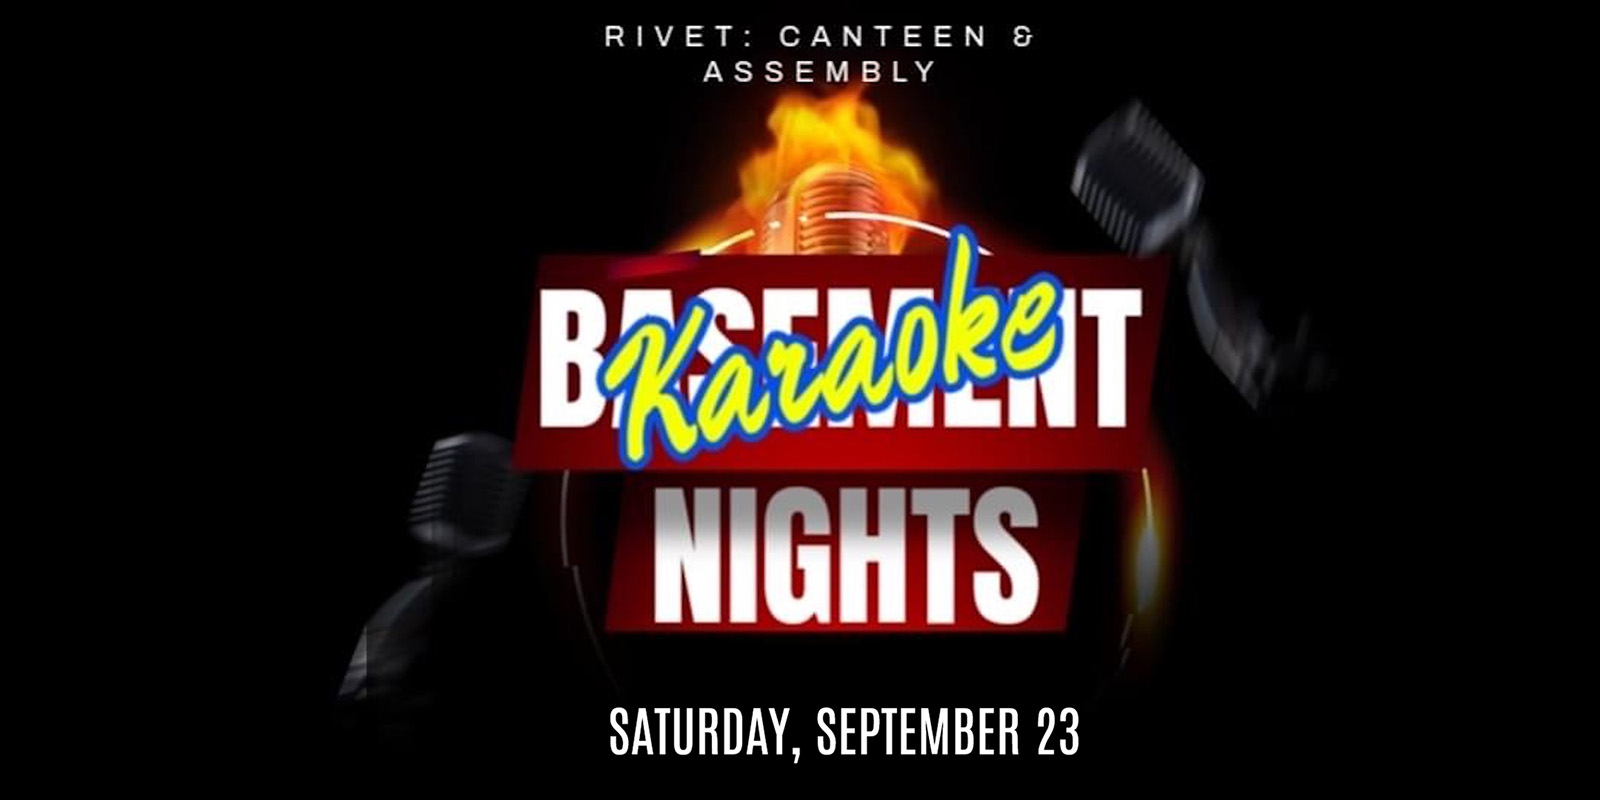 Basement Nights Karaoke at Rivet: Canteen & Assembly on Saturday, September 23rd, 2023. Doors: 9:00 PM. 21+ with ID ONLY.